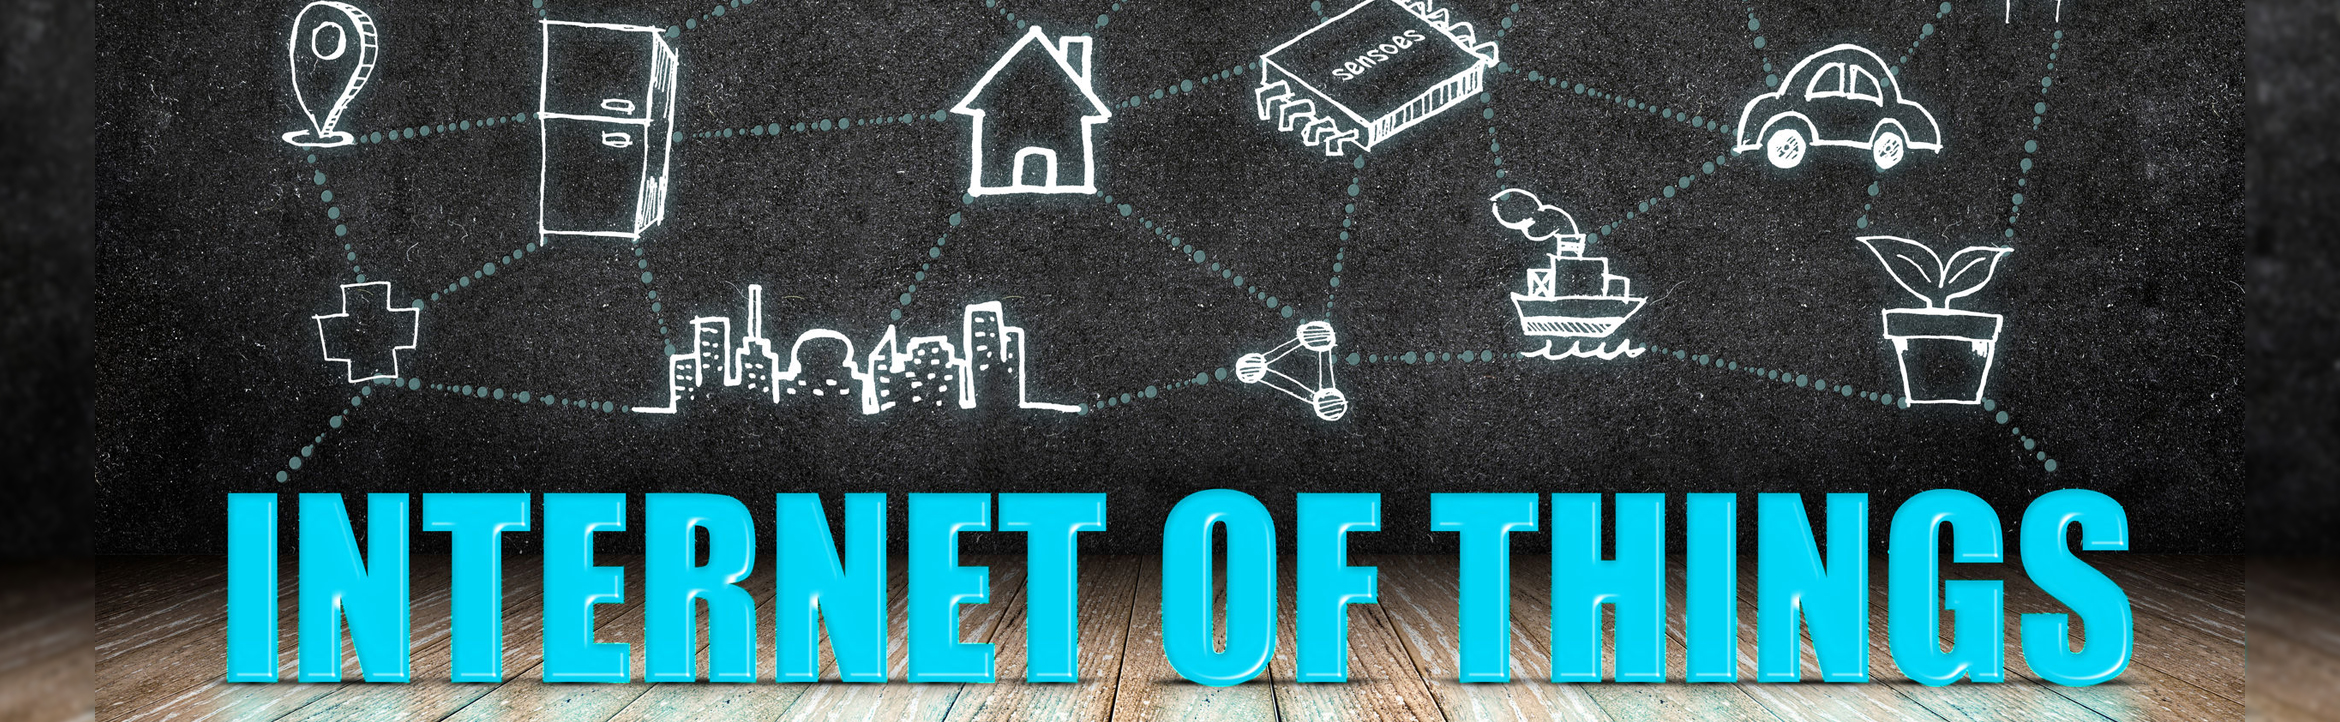 Internet of Things – Innovations of Tomorrow - Questers